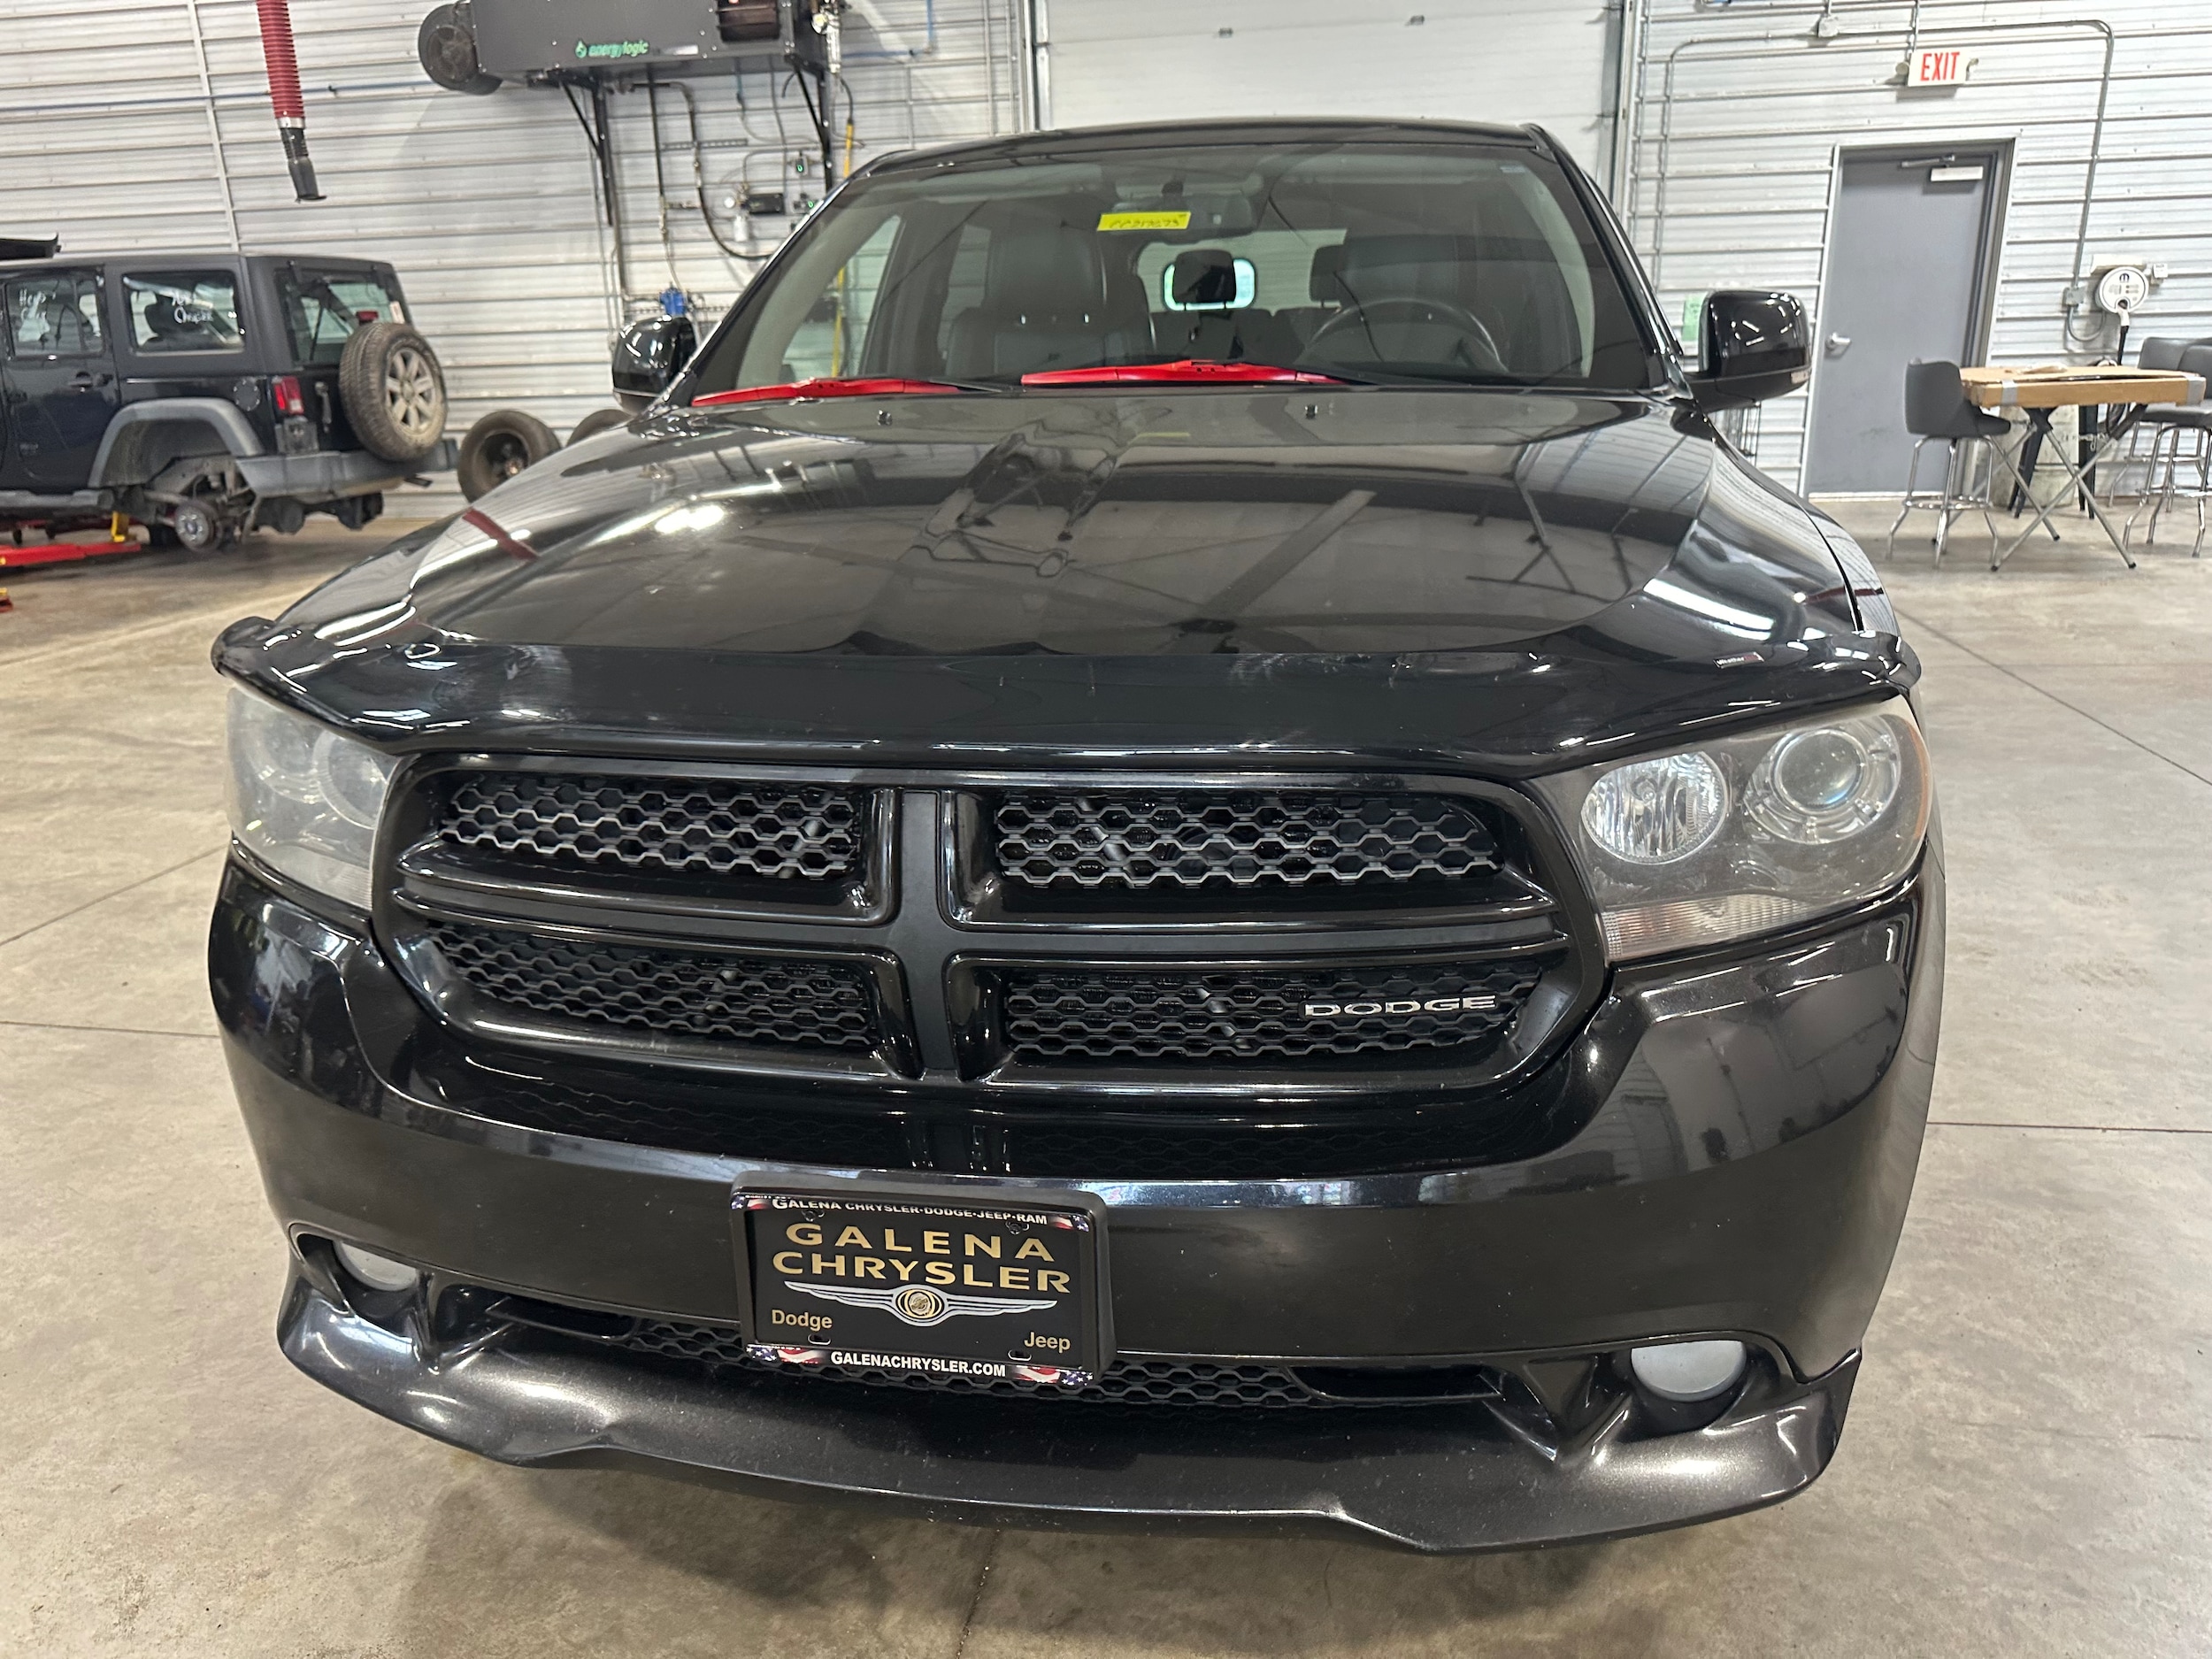 Used 2012 Dodge Durango R/T with VIN 1C4SDJCT0CC217673 for sale in Galena, IL